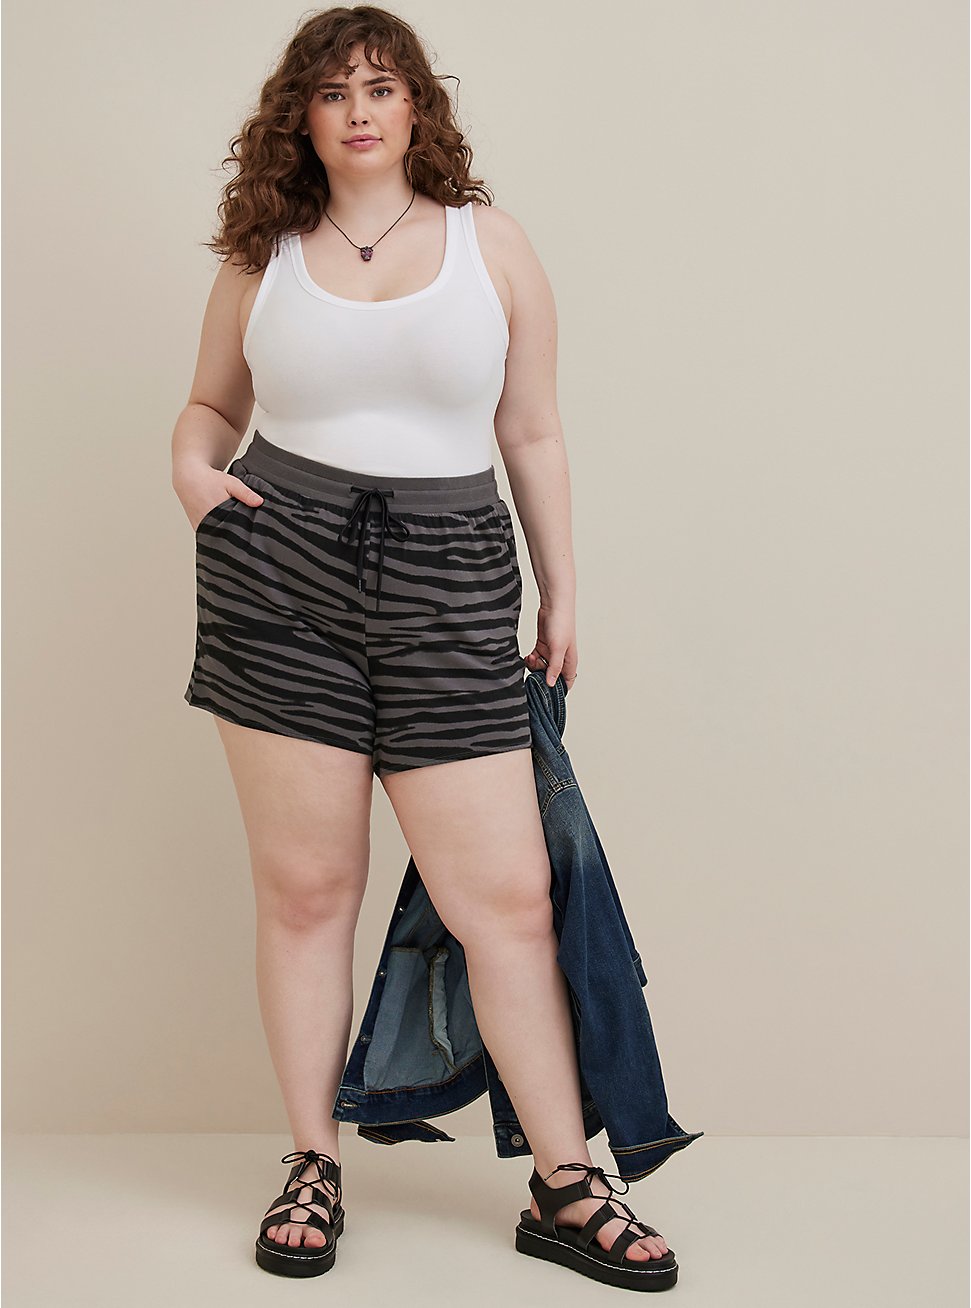 Plus Size Lovesick Pull-On Short - French Terry Tiger Stripe Grey, GREY, hi-res